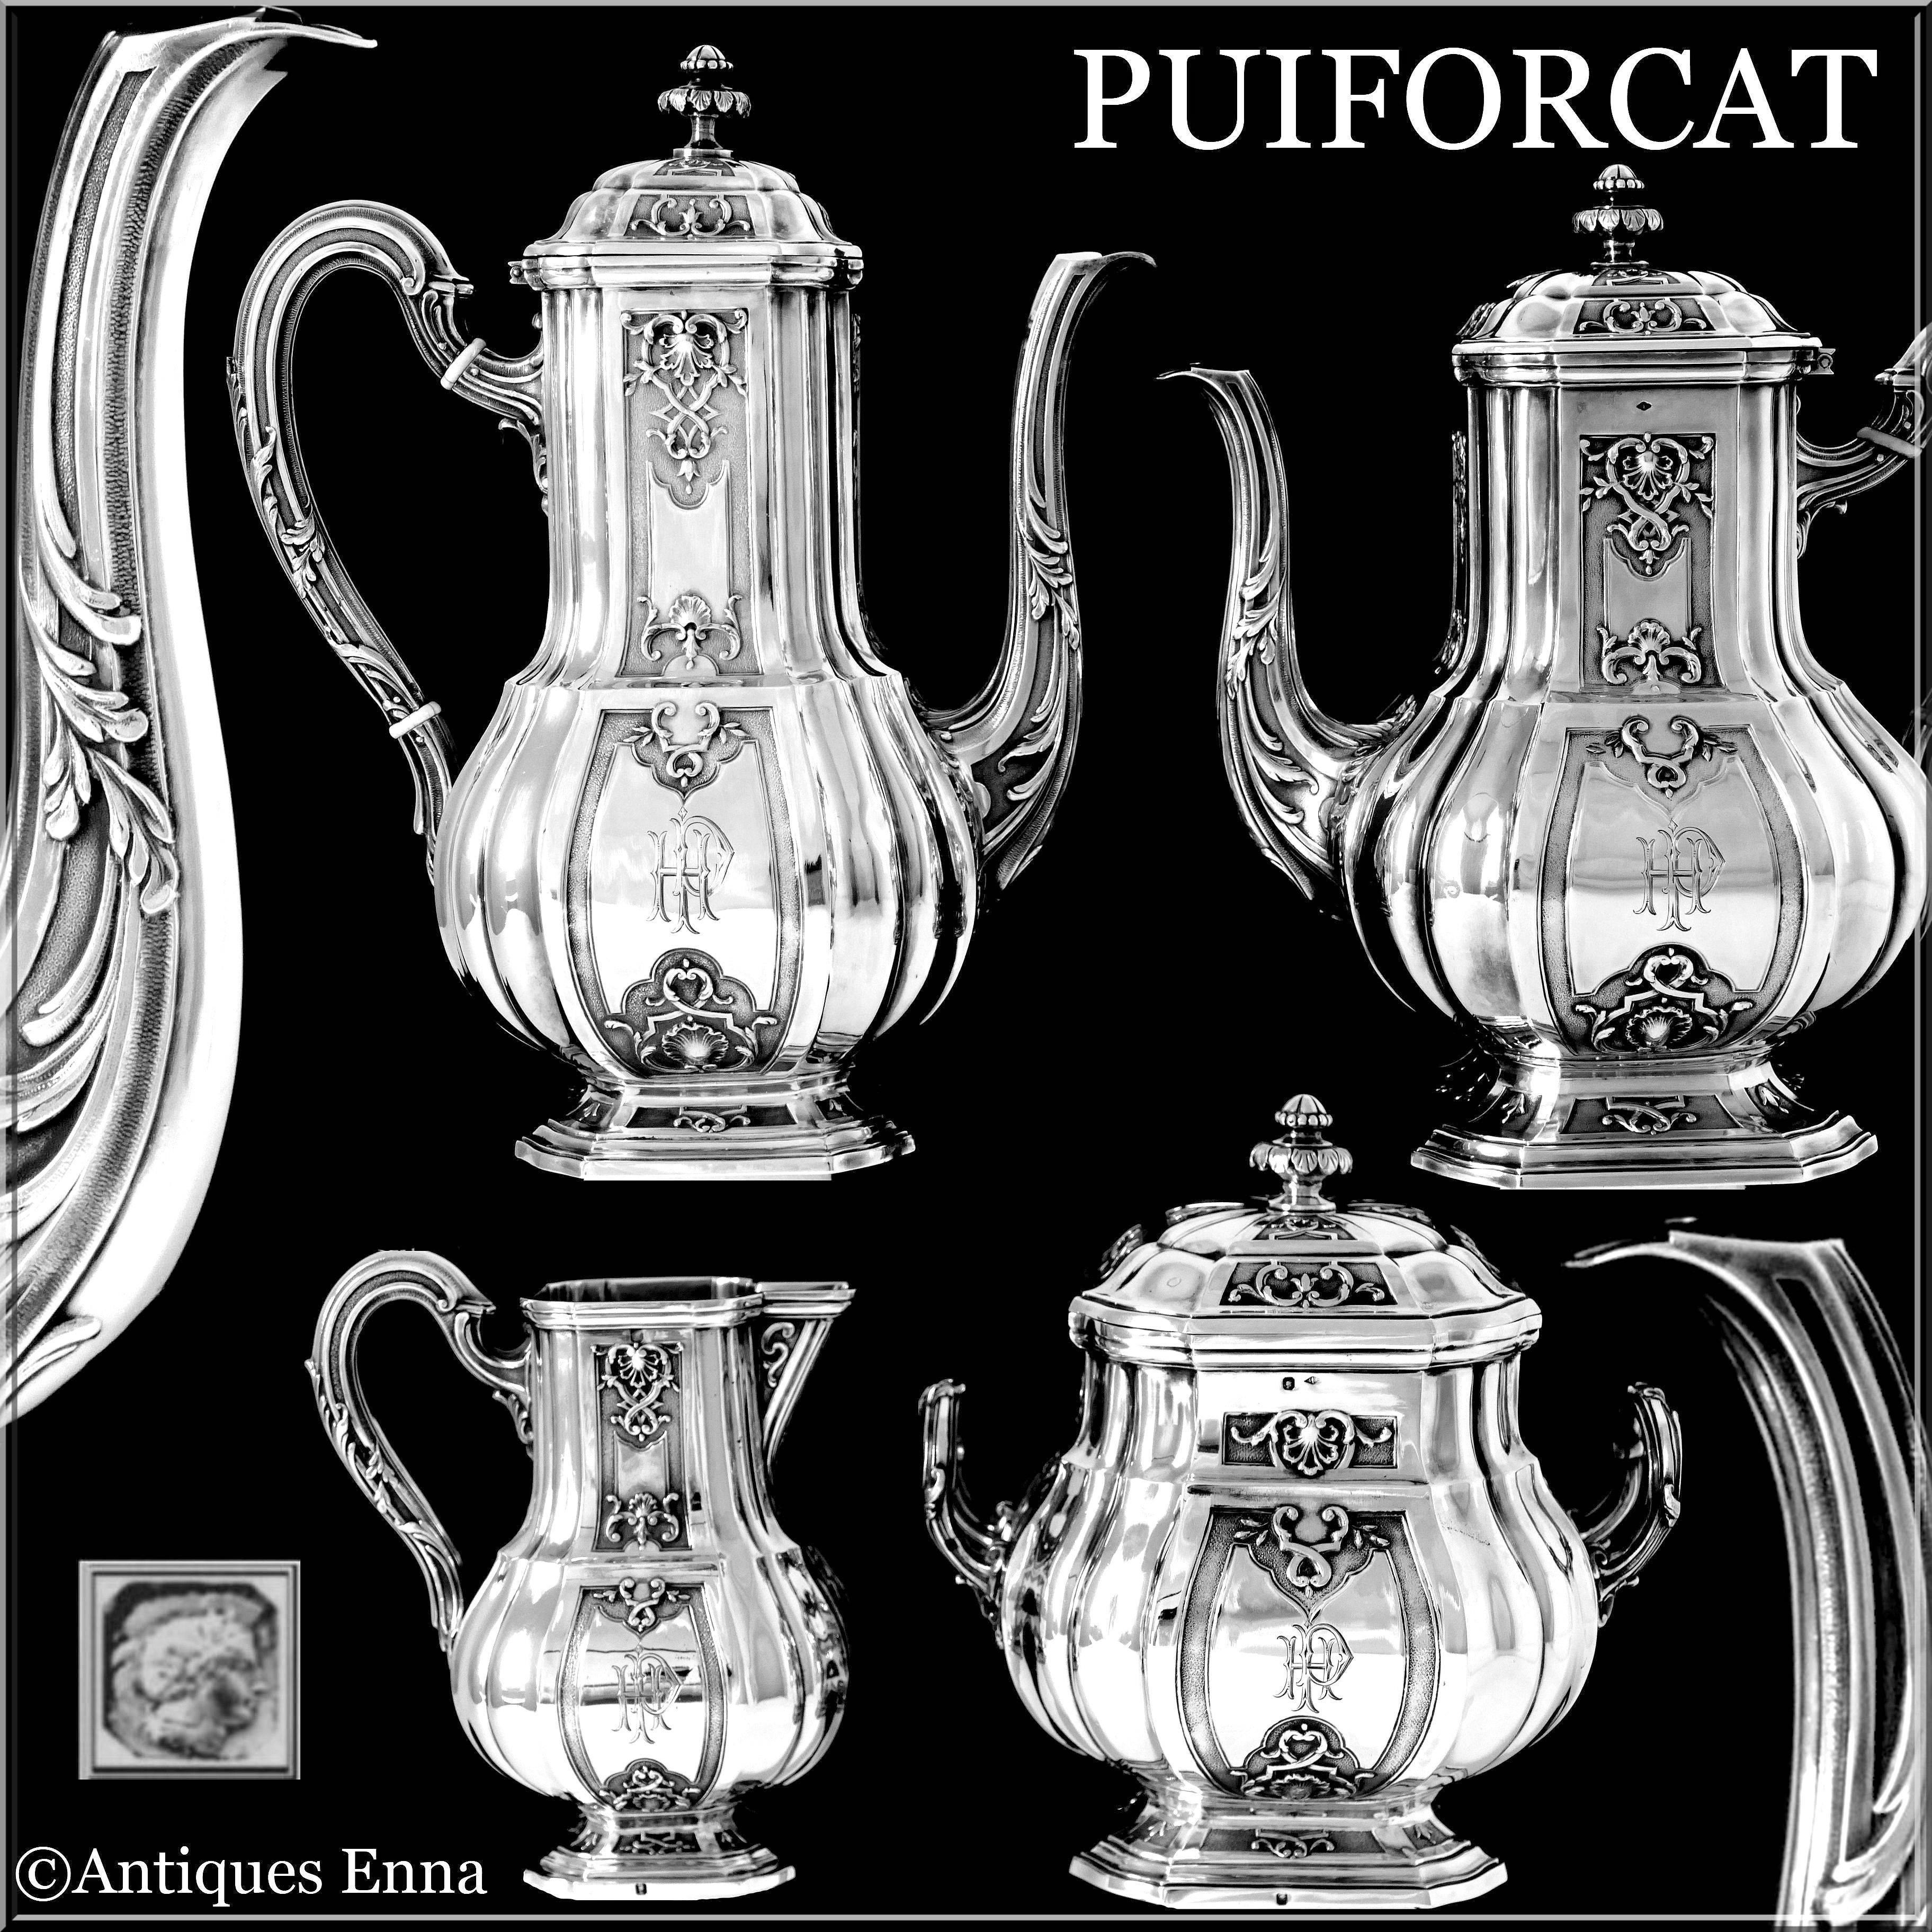 Head of Minerve first titre for 950/1000 French sterling silver vermeil guarantee. The quality of the gold used to recover sterling silver is a minimum of 750 mils (18-karat).

Once again, the Maison Puiforcat shows that it is one of the most